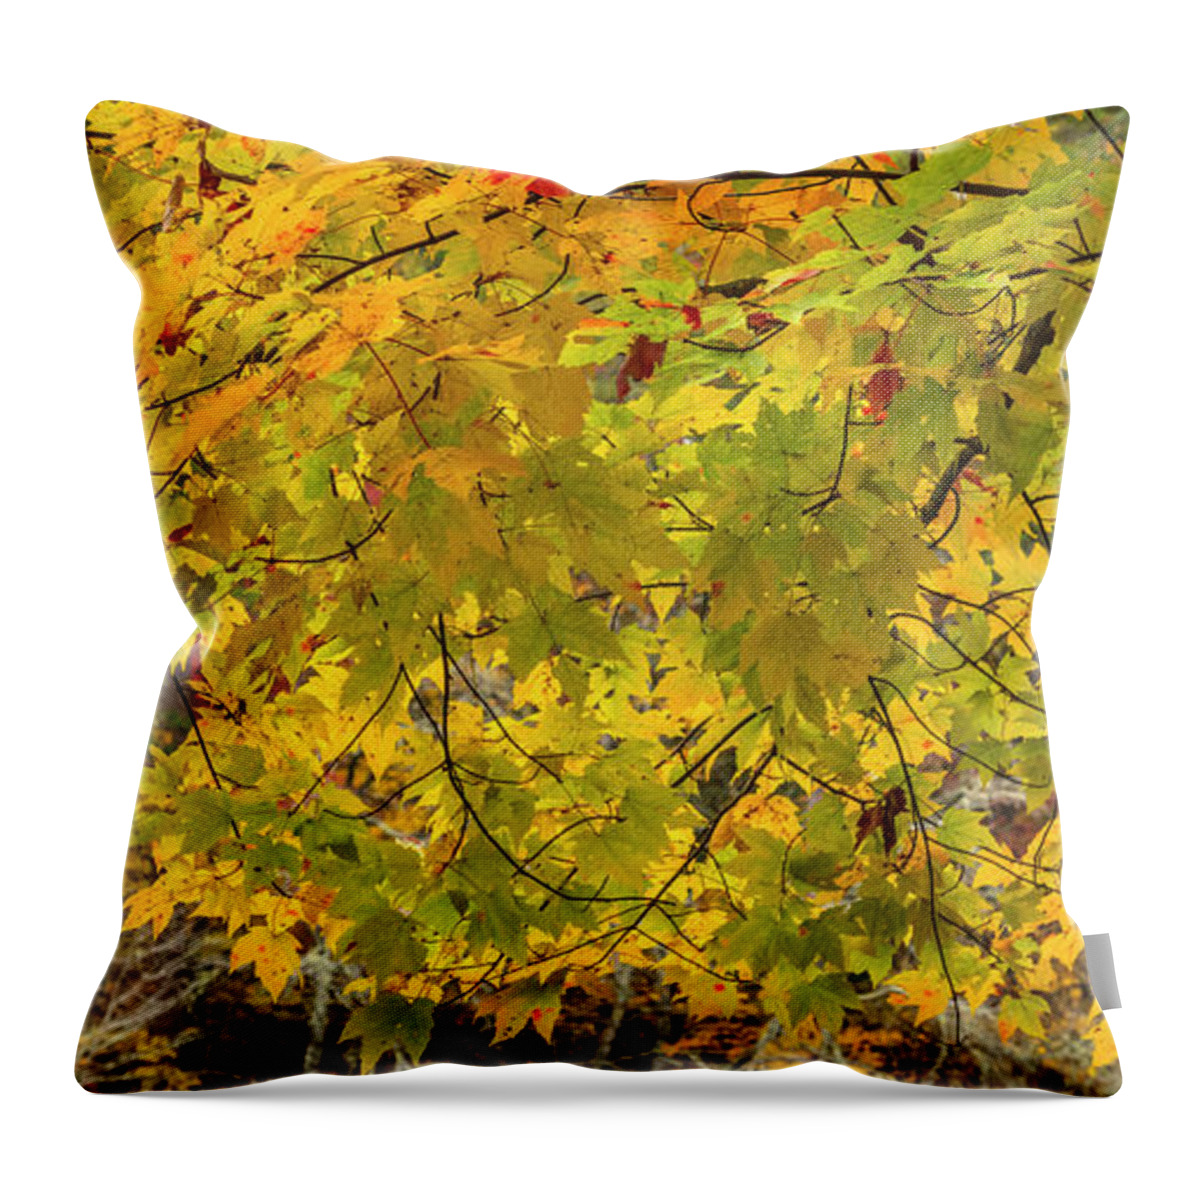 Carolina Throw Pillow featuring the photograph Branches of Autumn Golds II by Debra and Dave Vanderlaan